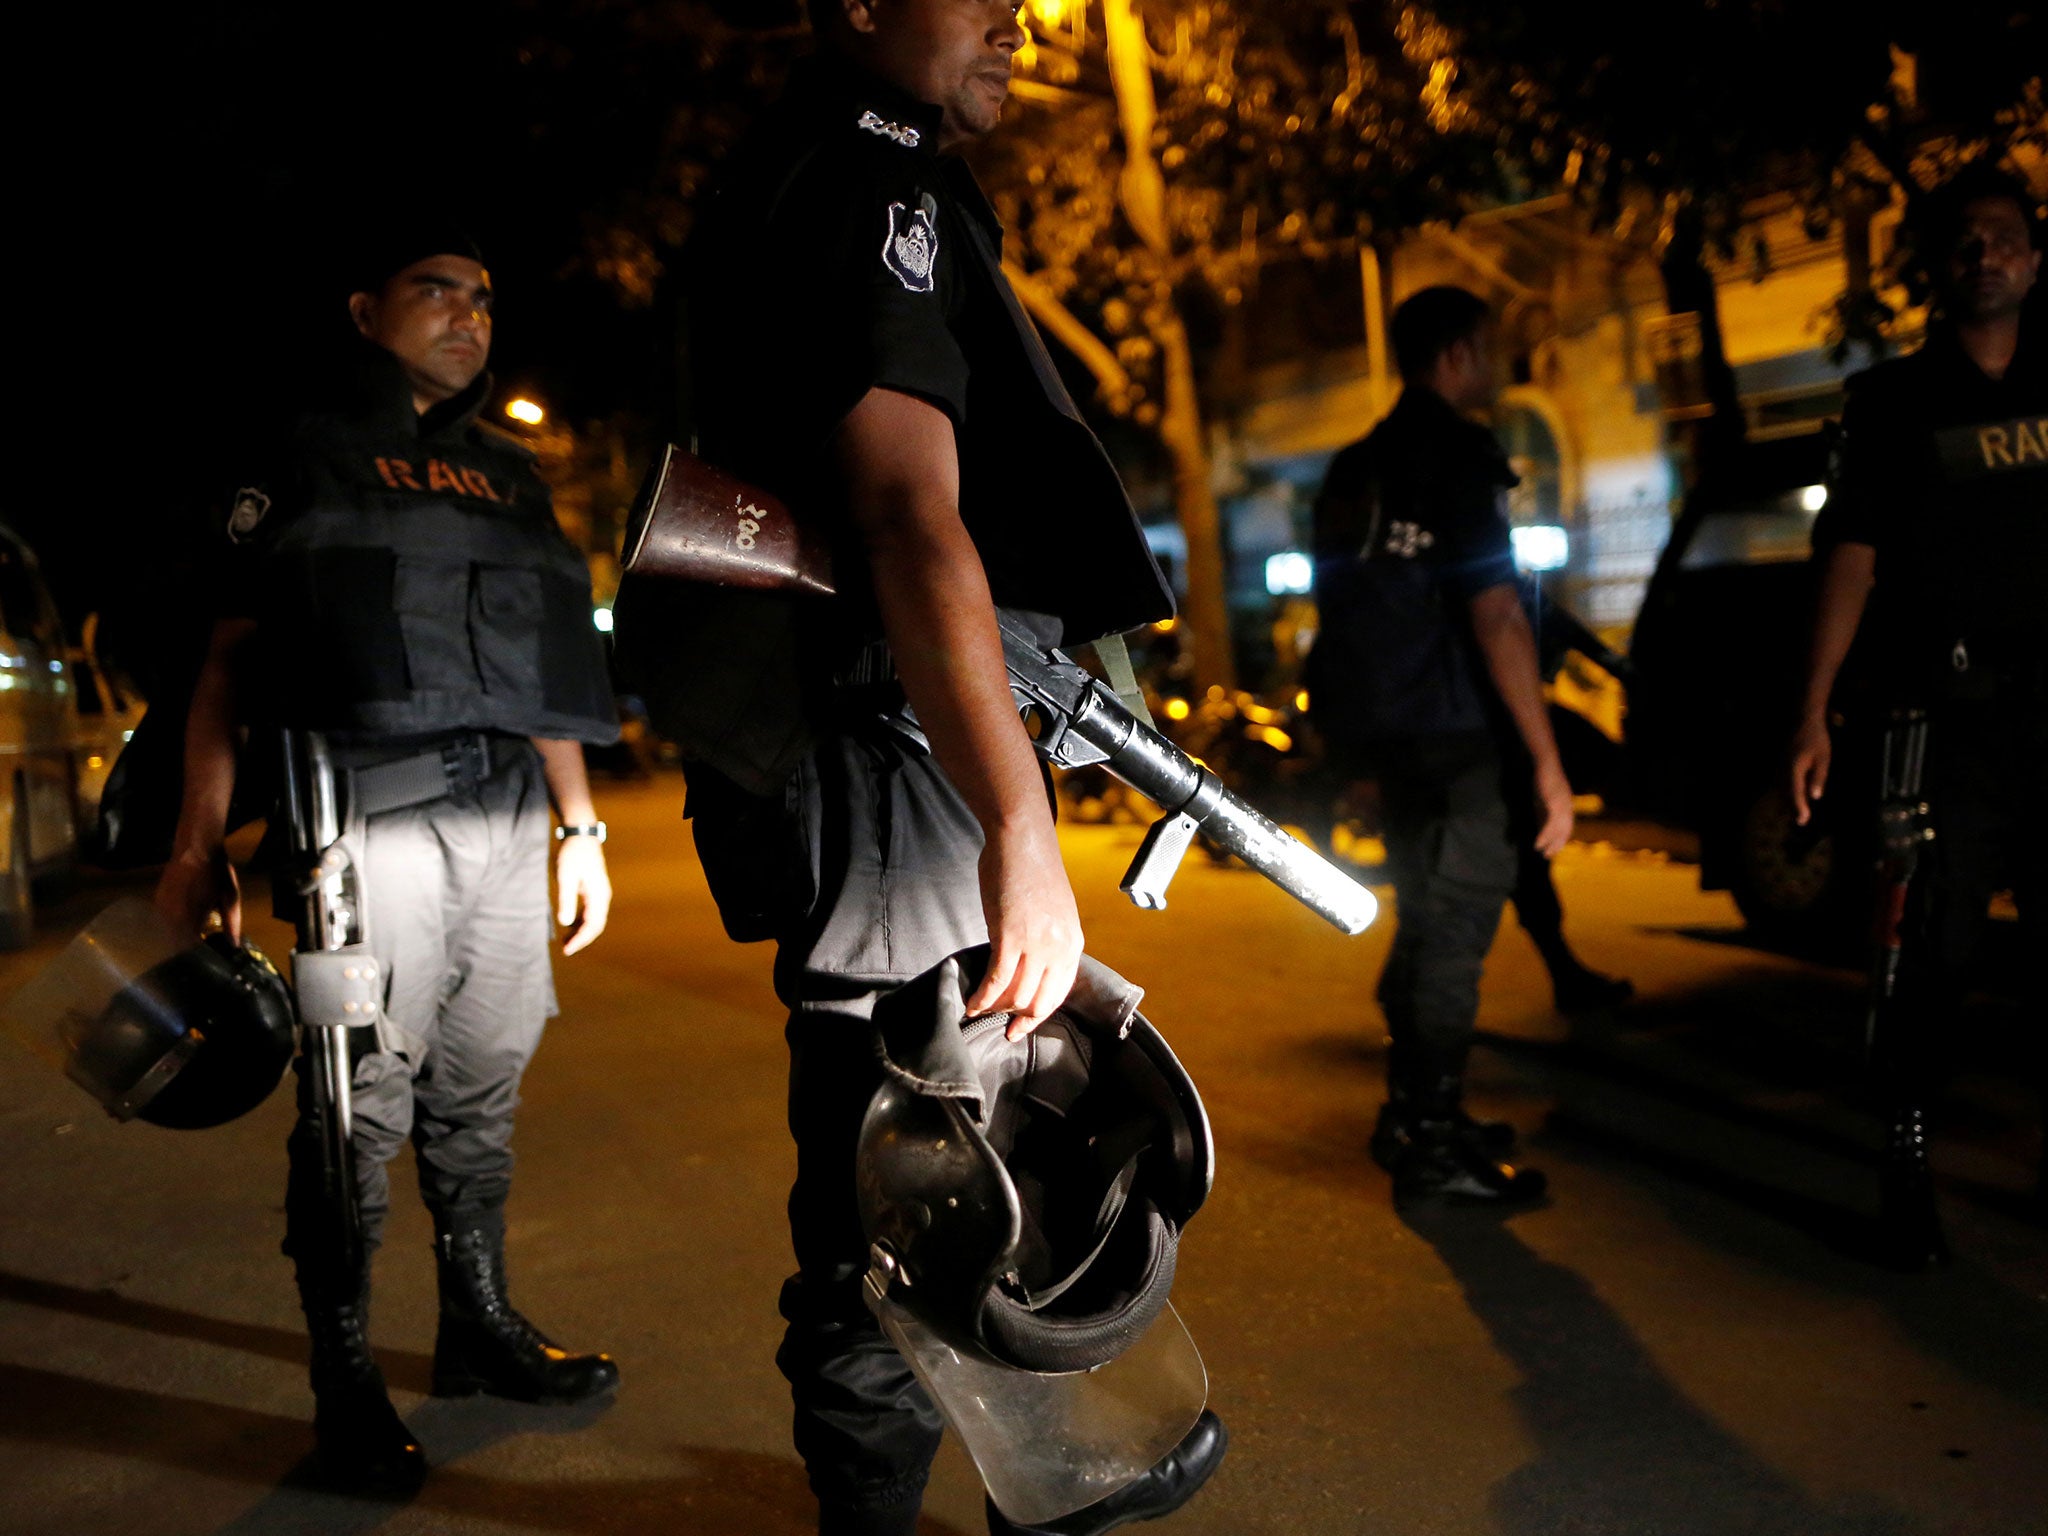 Security personnel keep watch, after gunmen stormed the Holey Artisan restaurant and took hostages, in the Gulshan area of Dhaka, Bangladesh July 2, 2016.